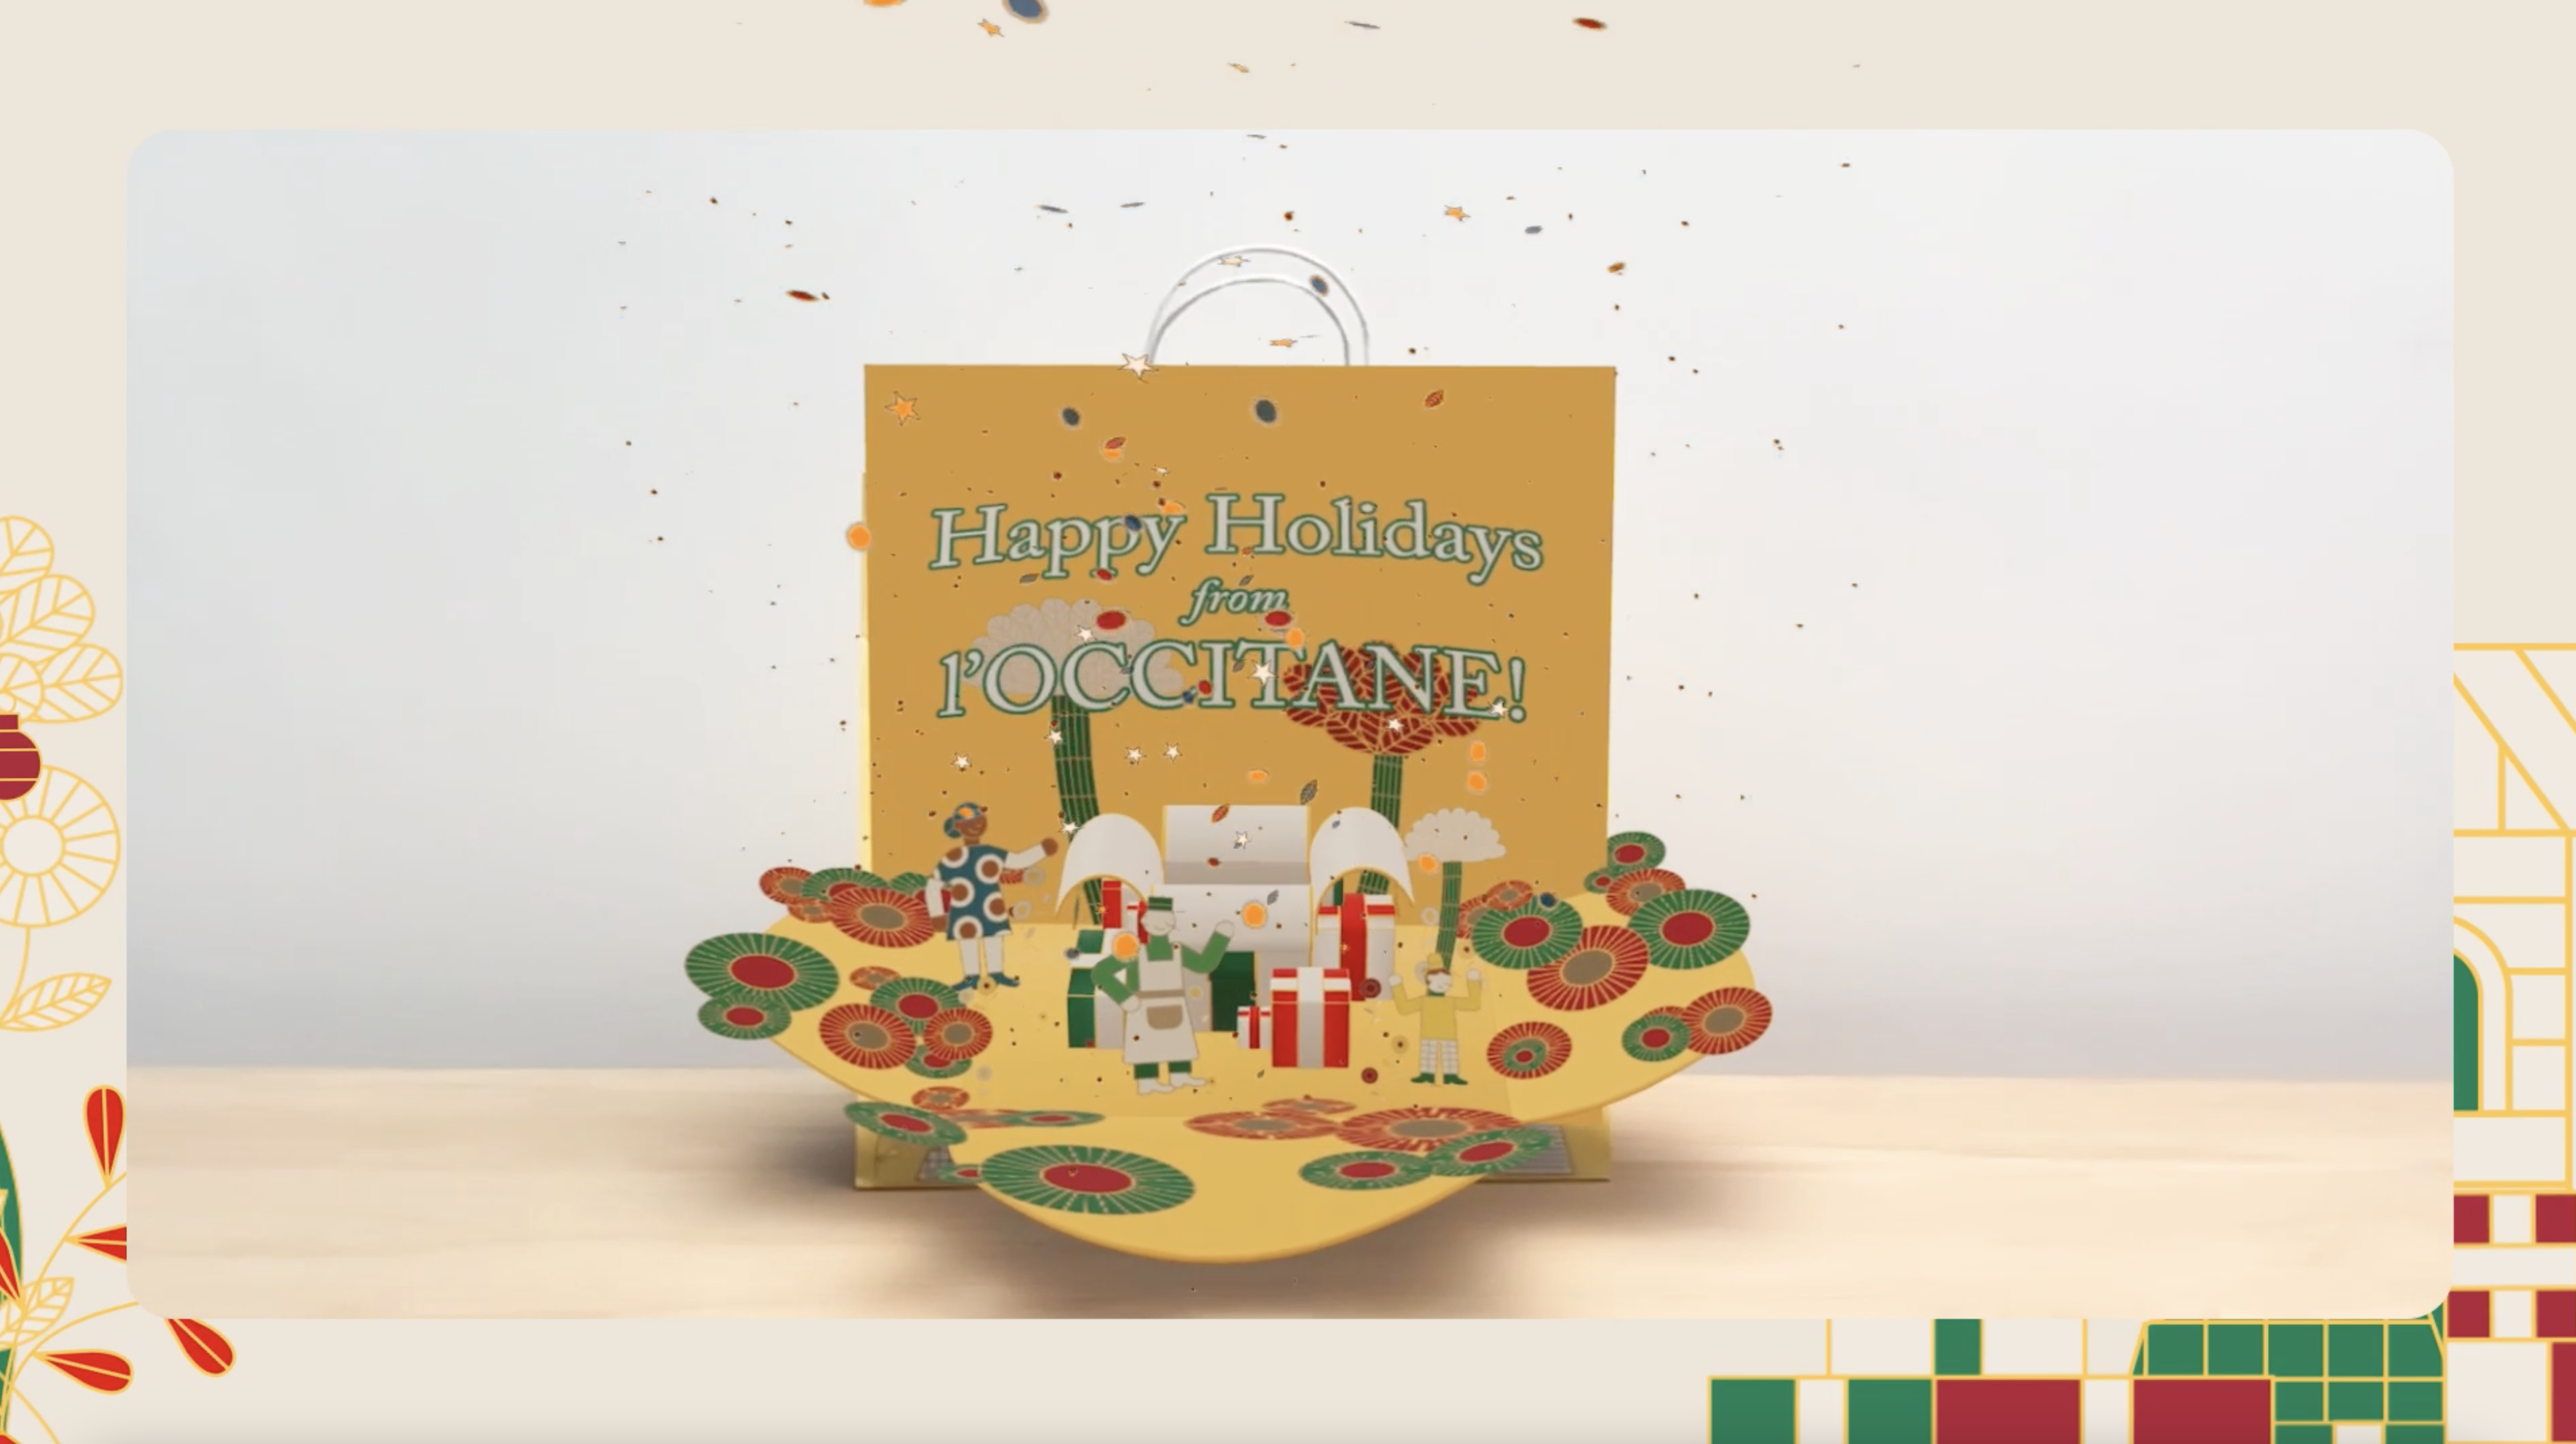 10 ways brands and marketers are using the power of Web AR to spread holiday cheer this season